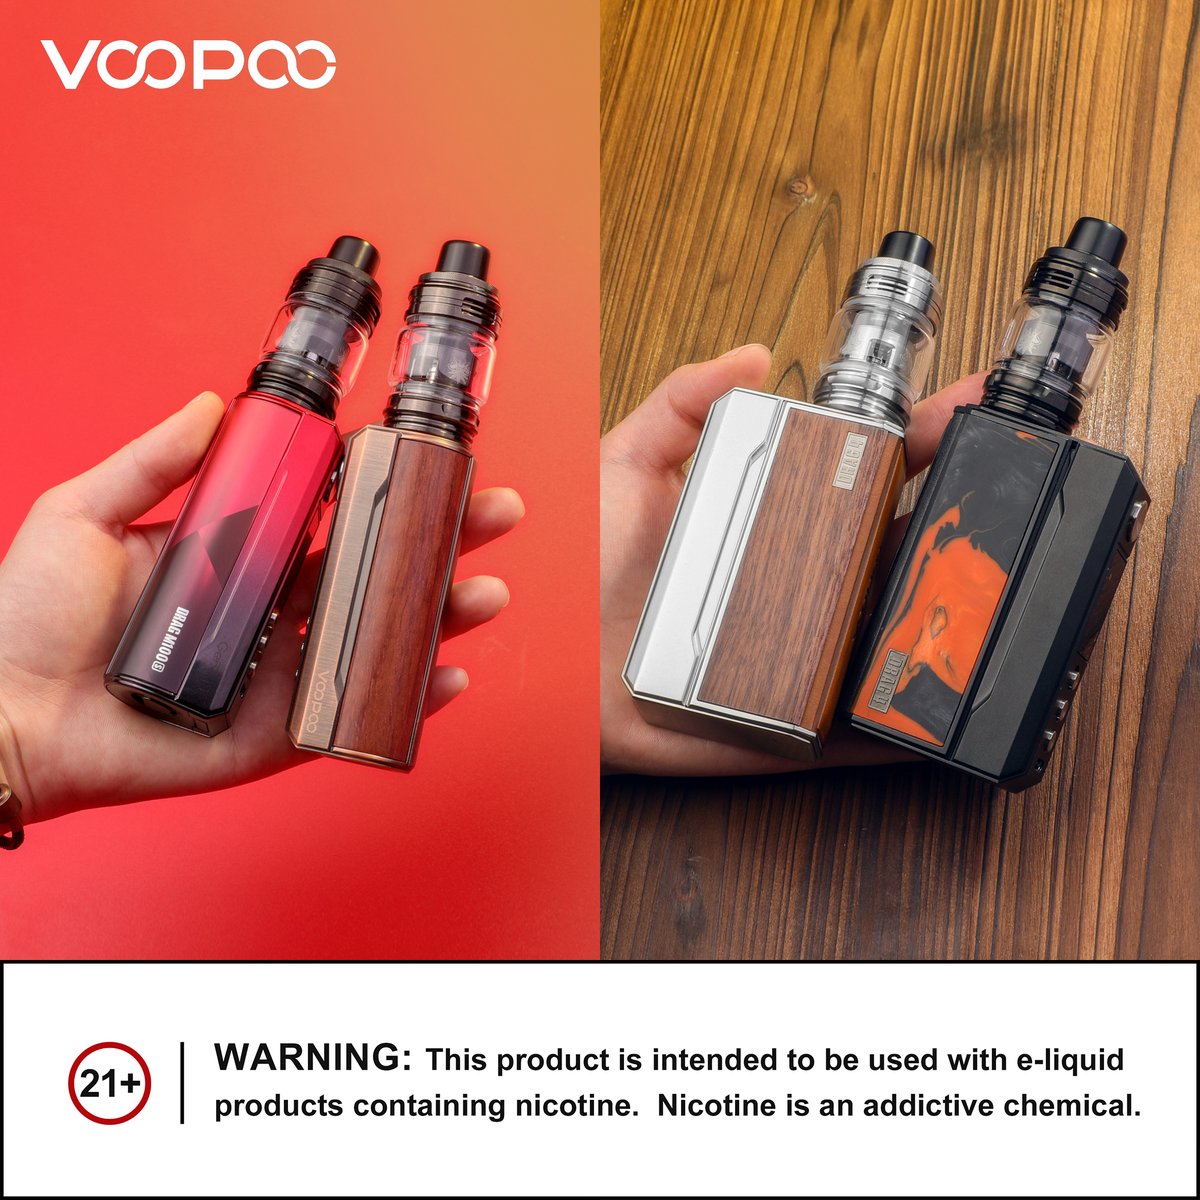 Which do you prefer

Dual batteries 🙌or Single battery😍?  

Let us know in the comments. 🔥
#voopoo #voopoodrag #vaping #voopoodragfamily #drag4 #dragm100s #vapecommunity  #vapelifestyle #LegendInYourHand